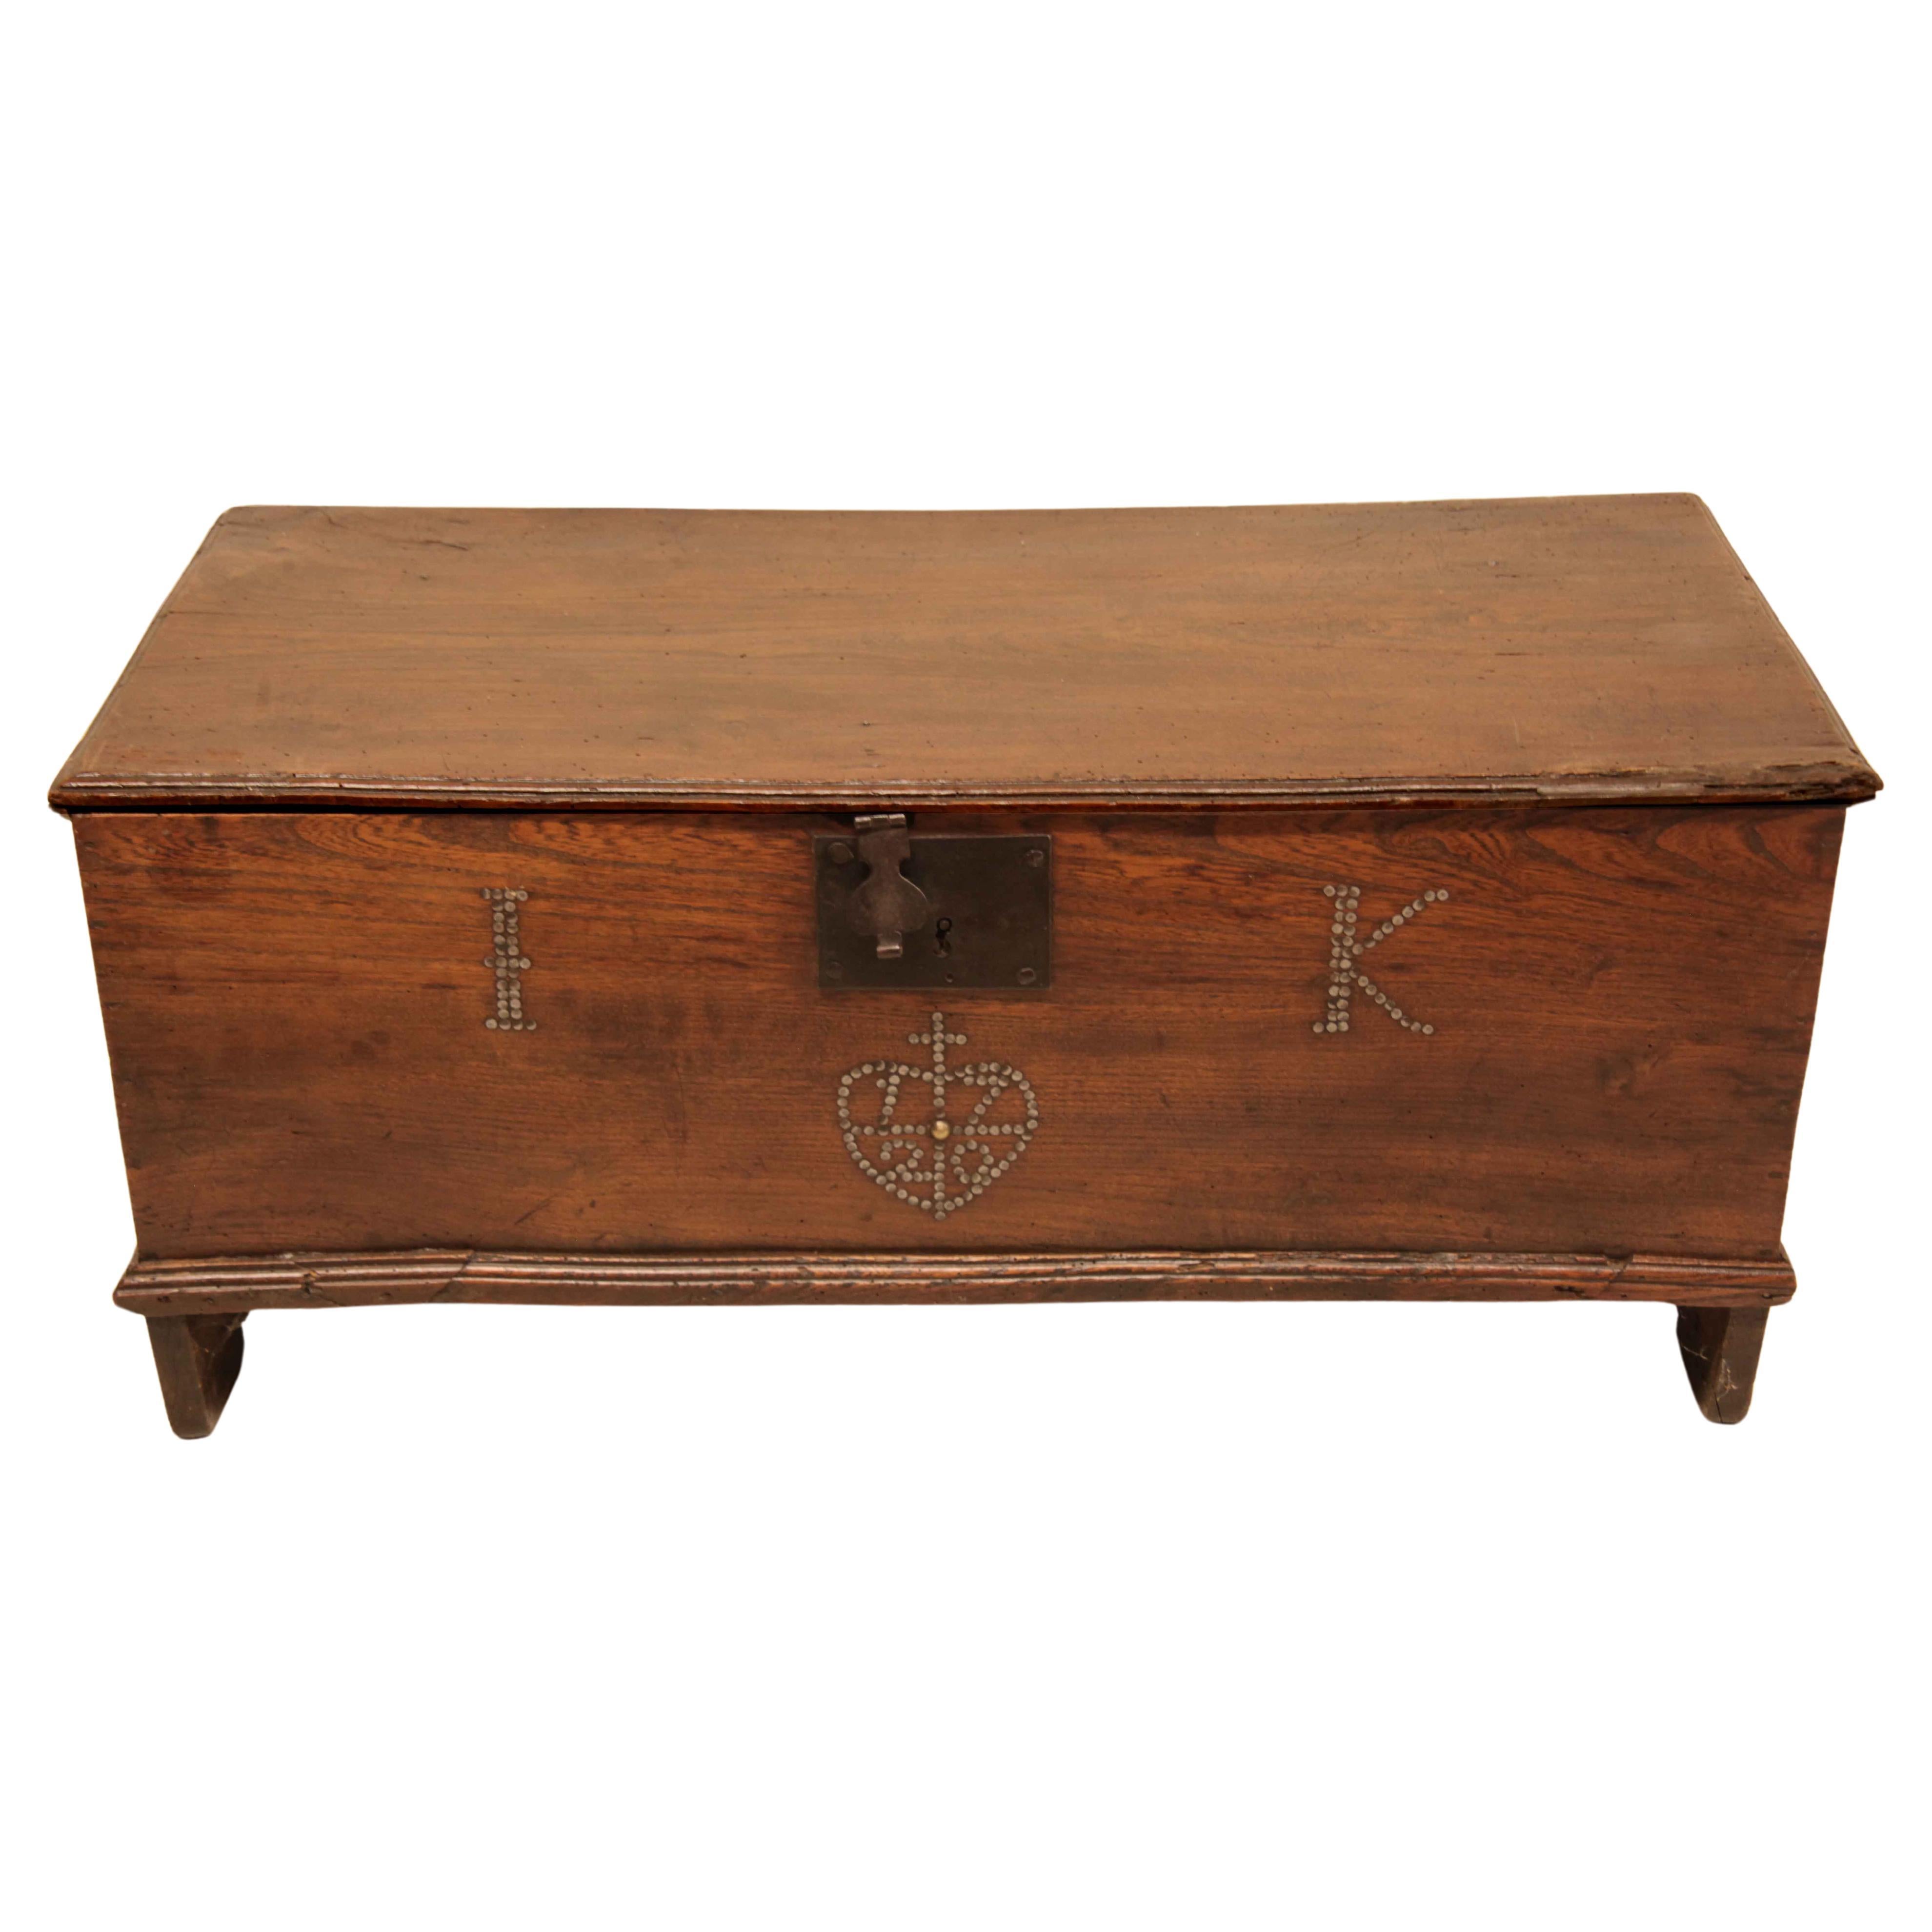 Early 18th Century English Elm Coffer For Sale